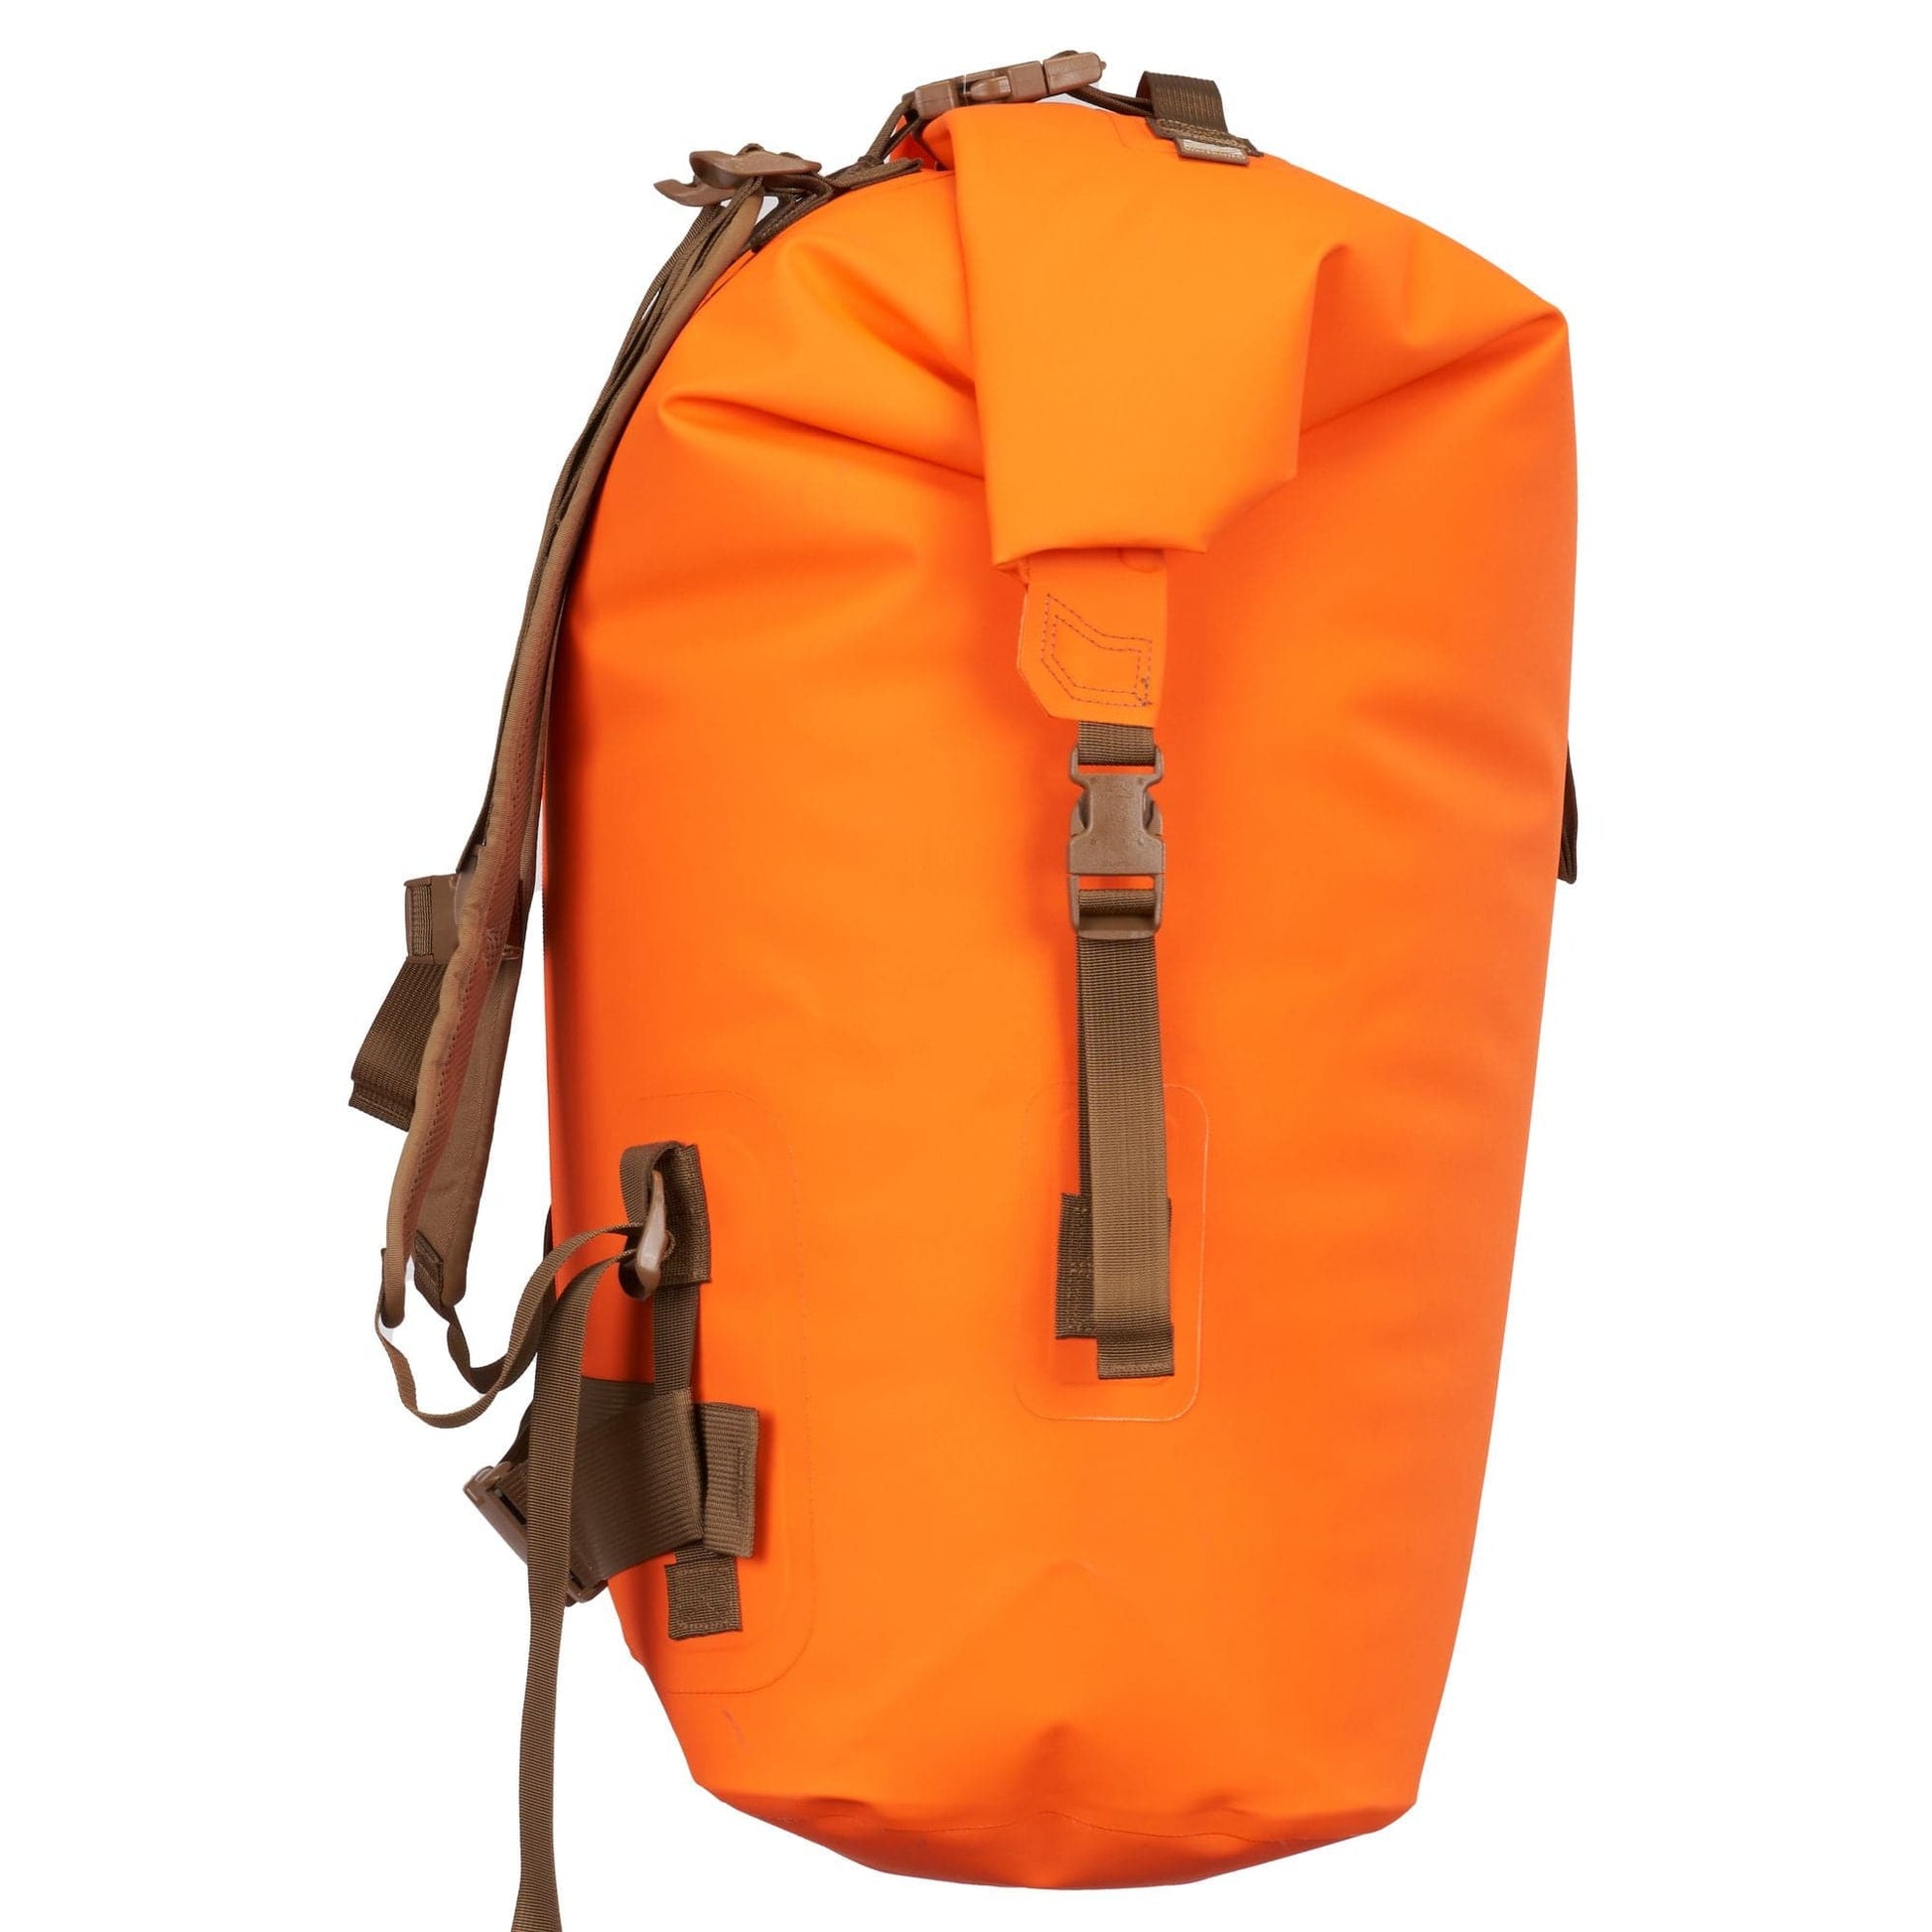 Featuring the Westwater Drypack dry bag manufactured by Watershed shown here from a seventh angle.